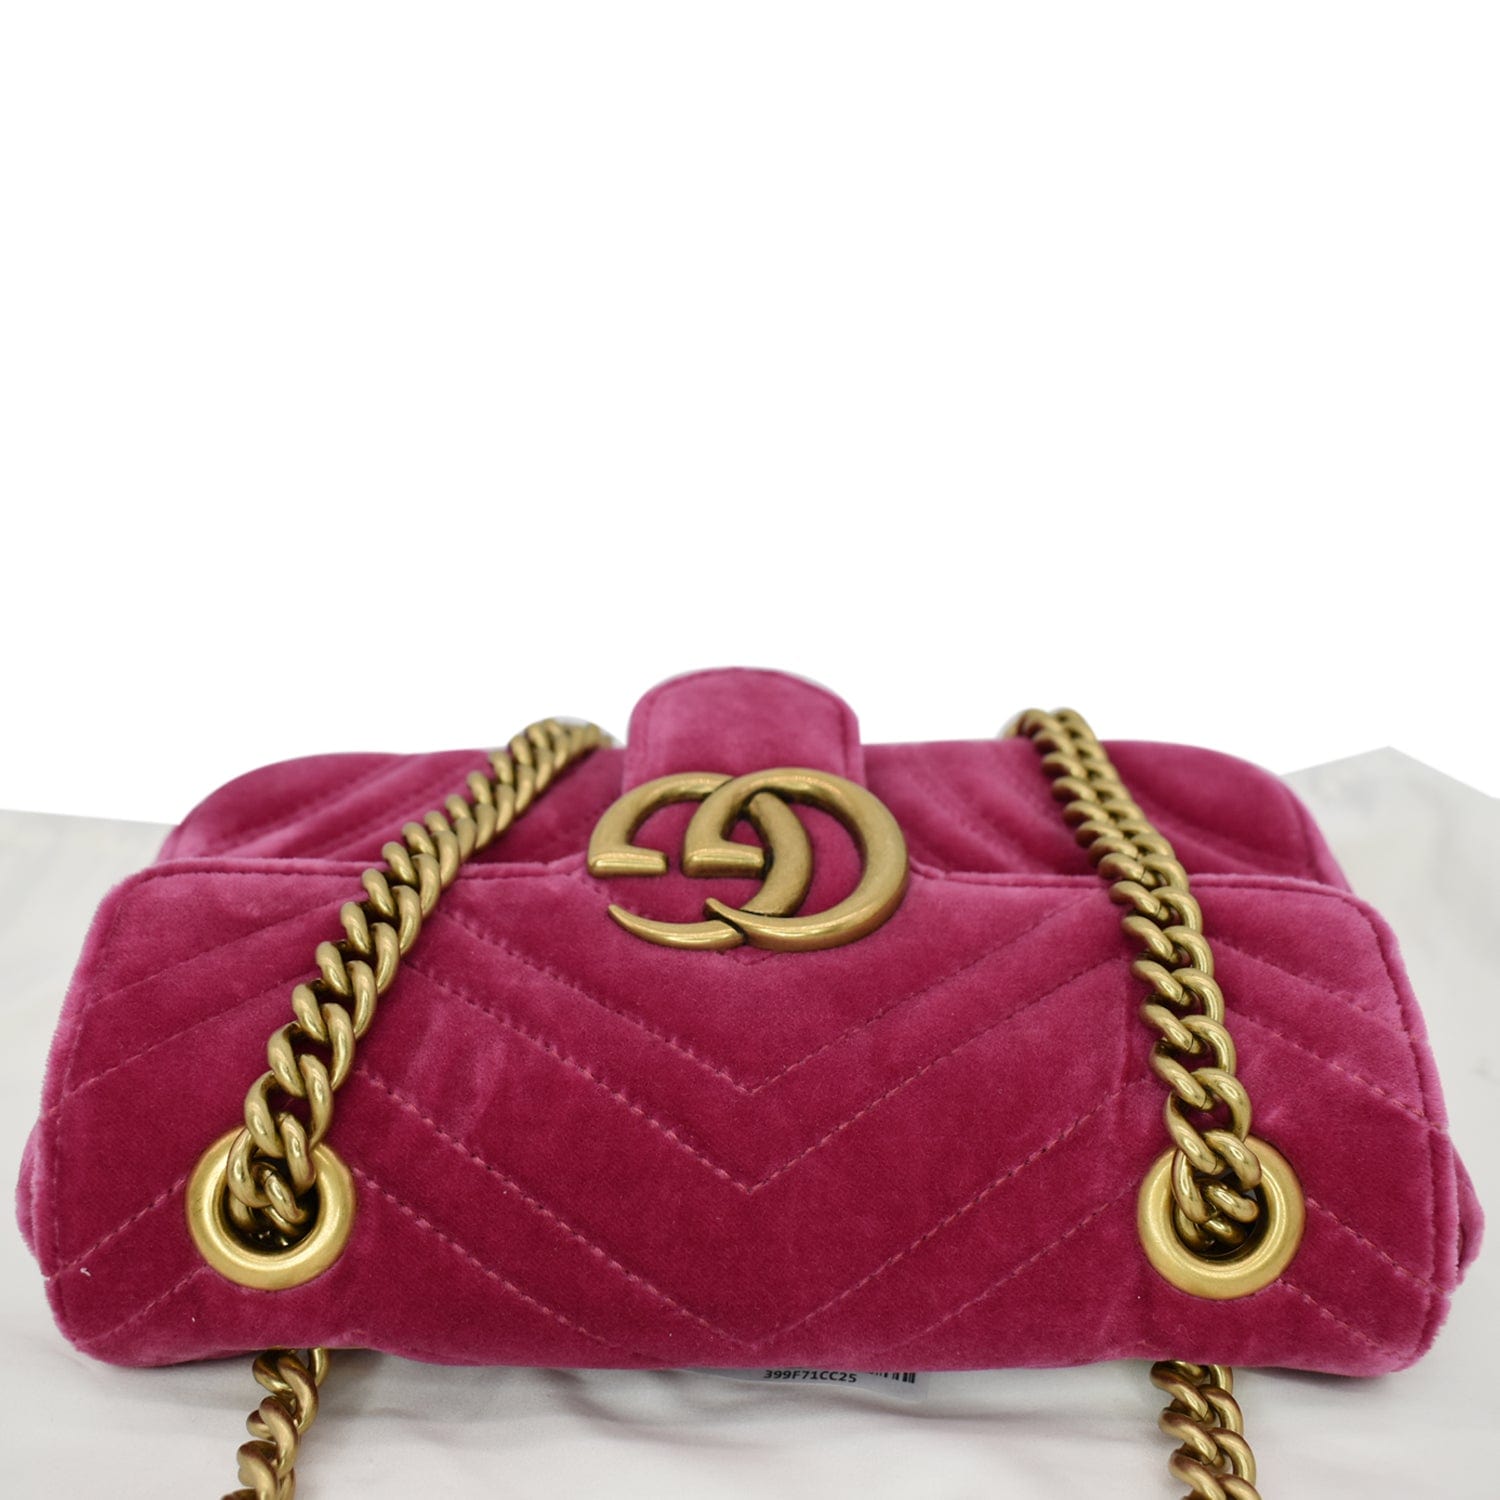 GUCCI GG Marmont Small Pink Velvet Crossbody Bag – Fashion Reloved